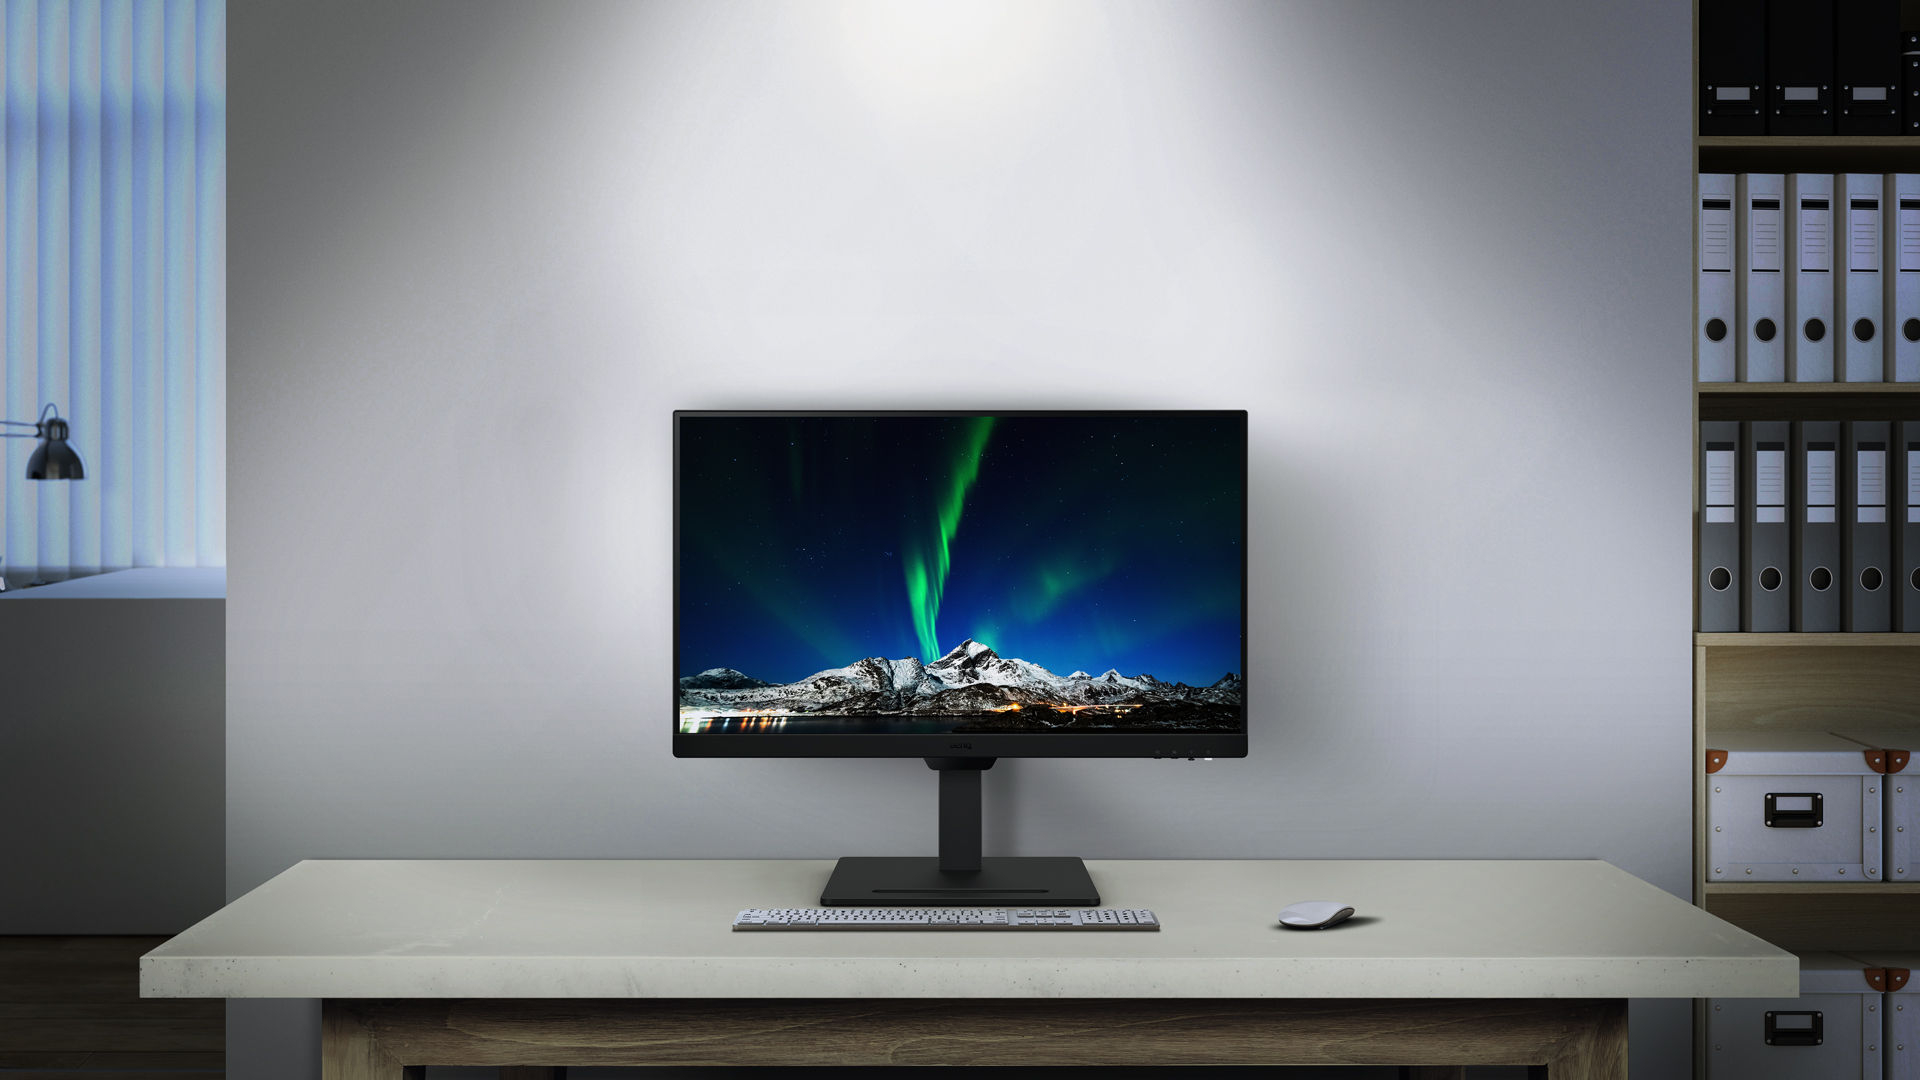 BenQ BL2790T comes with BenQ Brightness Intelligence technology for comfort while maintaining vivid colors